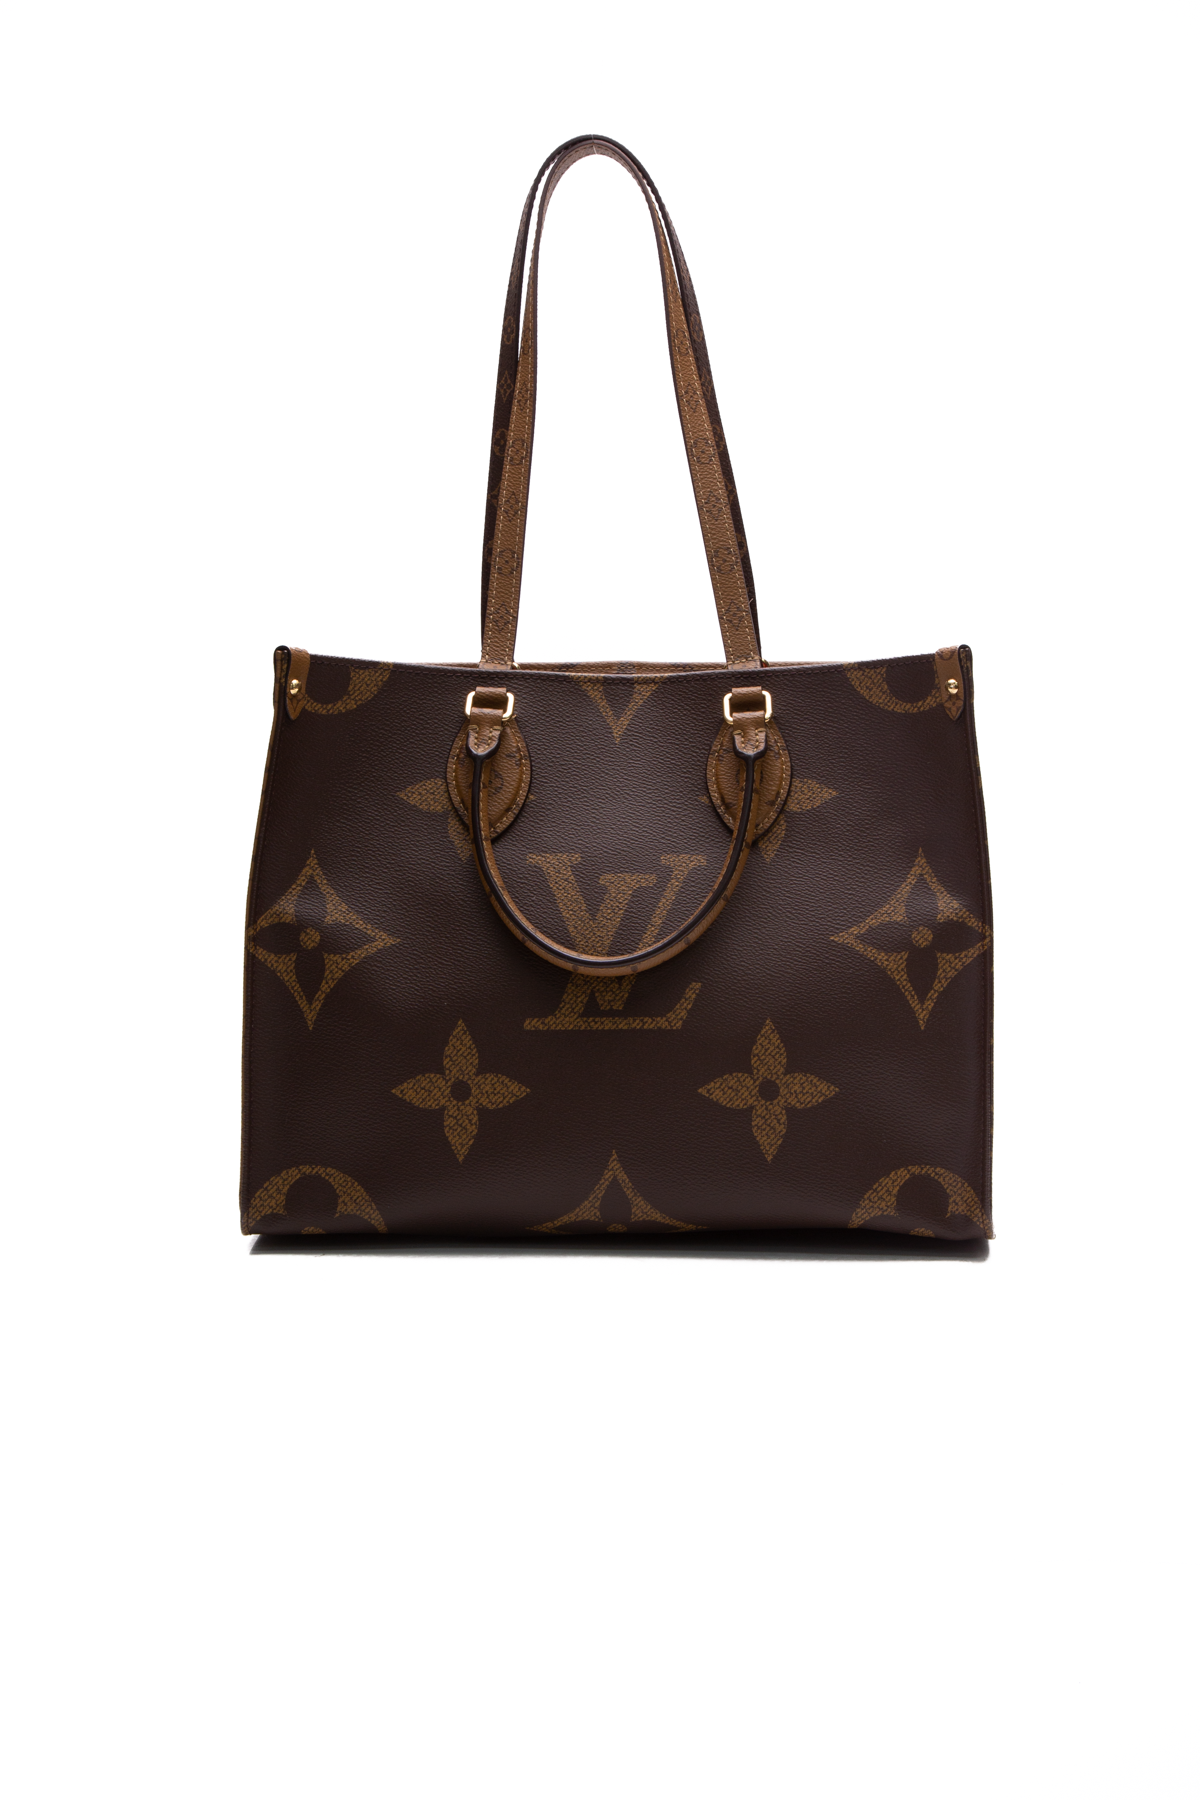 Louis Vuitton Buckle Large Bags & Handbags for Women, Authenticity  Guaranteed